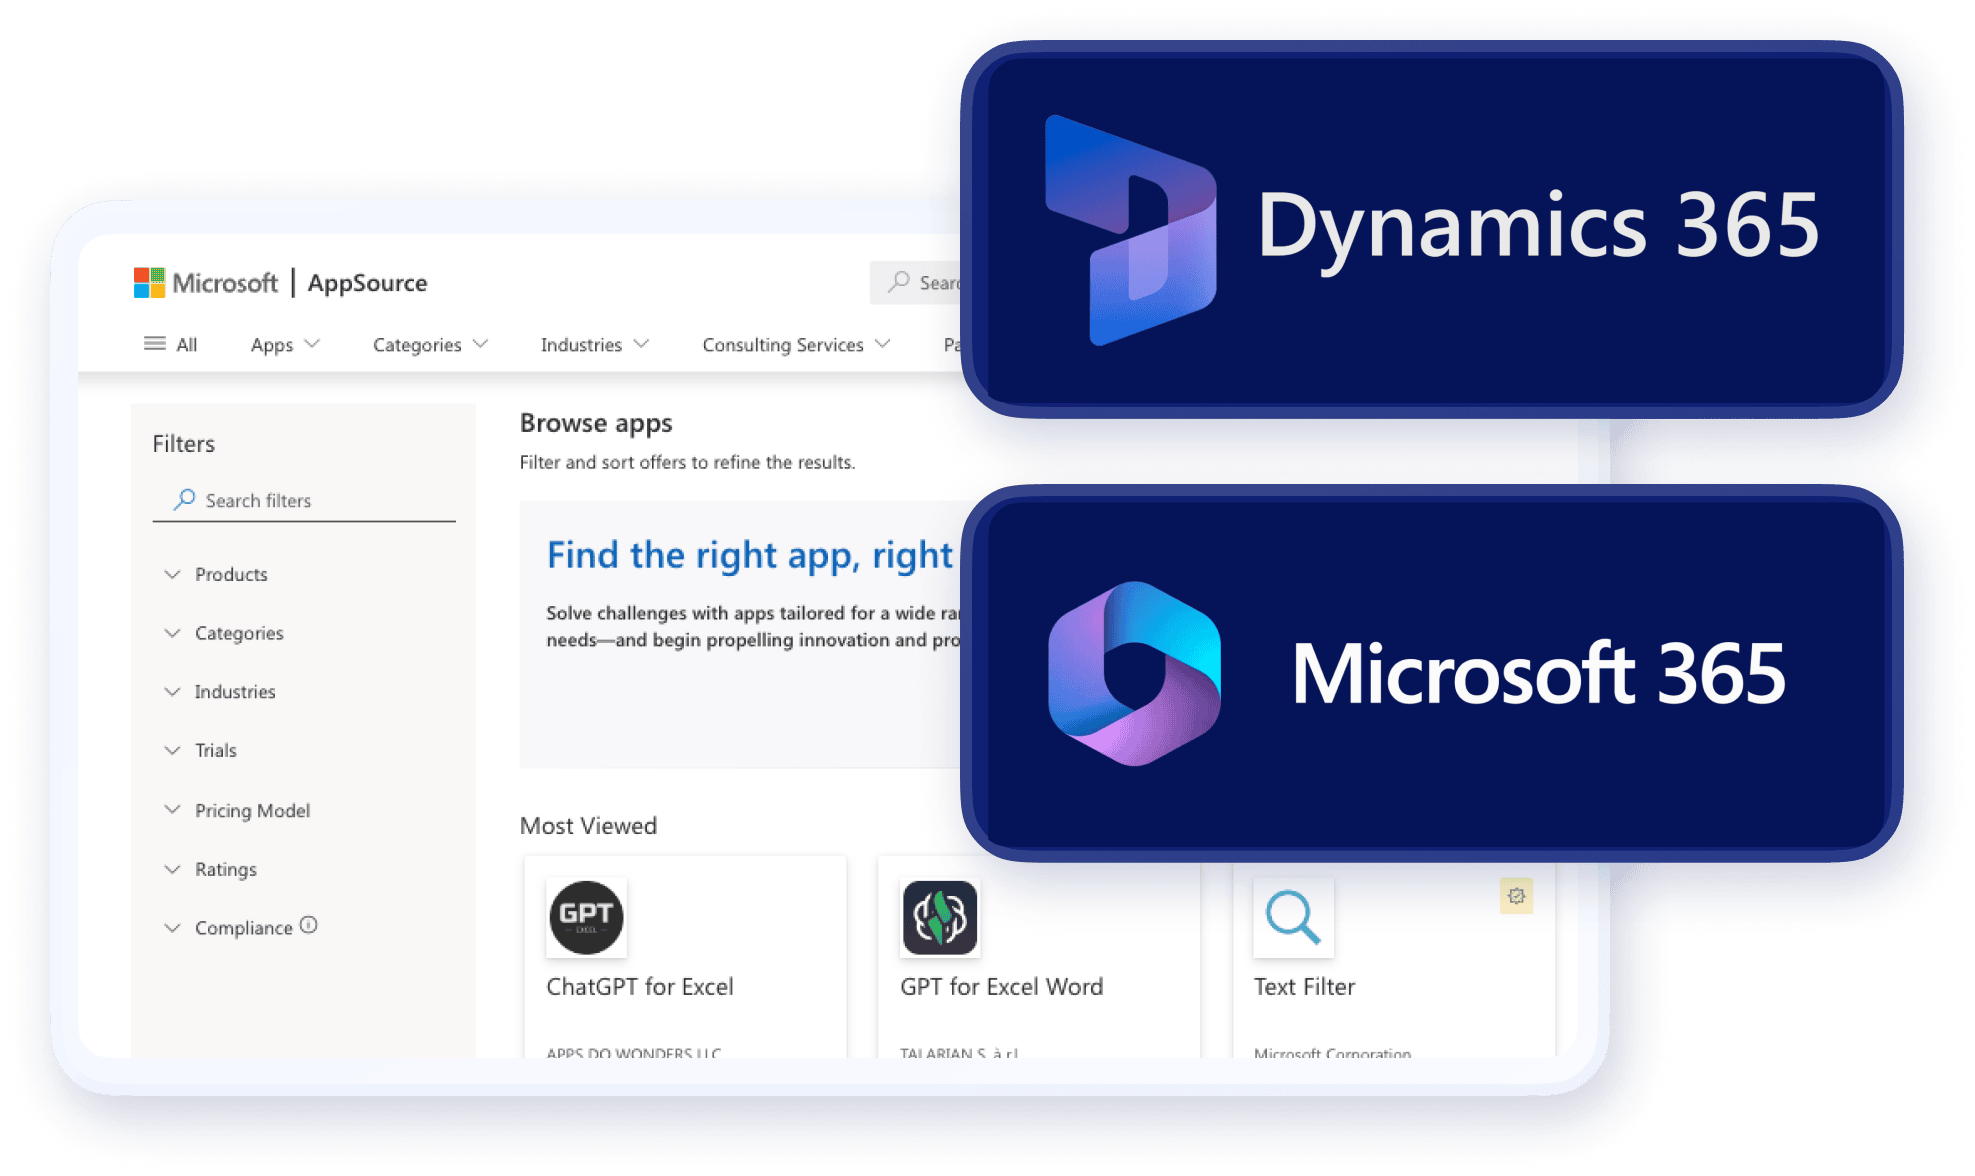 Microsoft 365, Dynamics and Appsource